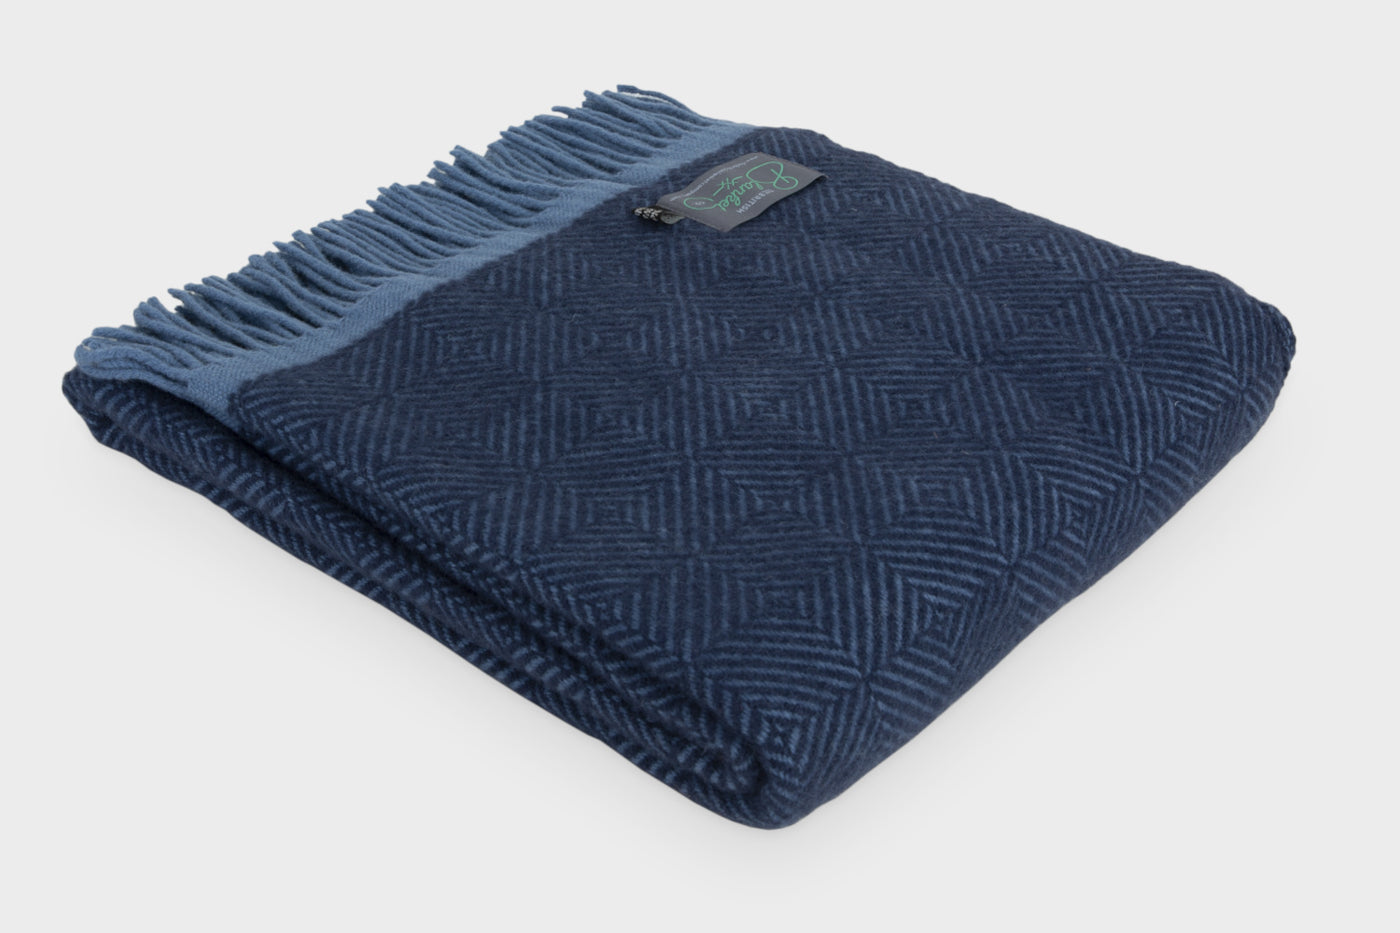 Folded blue wildweave wool throw by The British Blanket Company